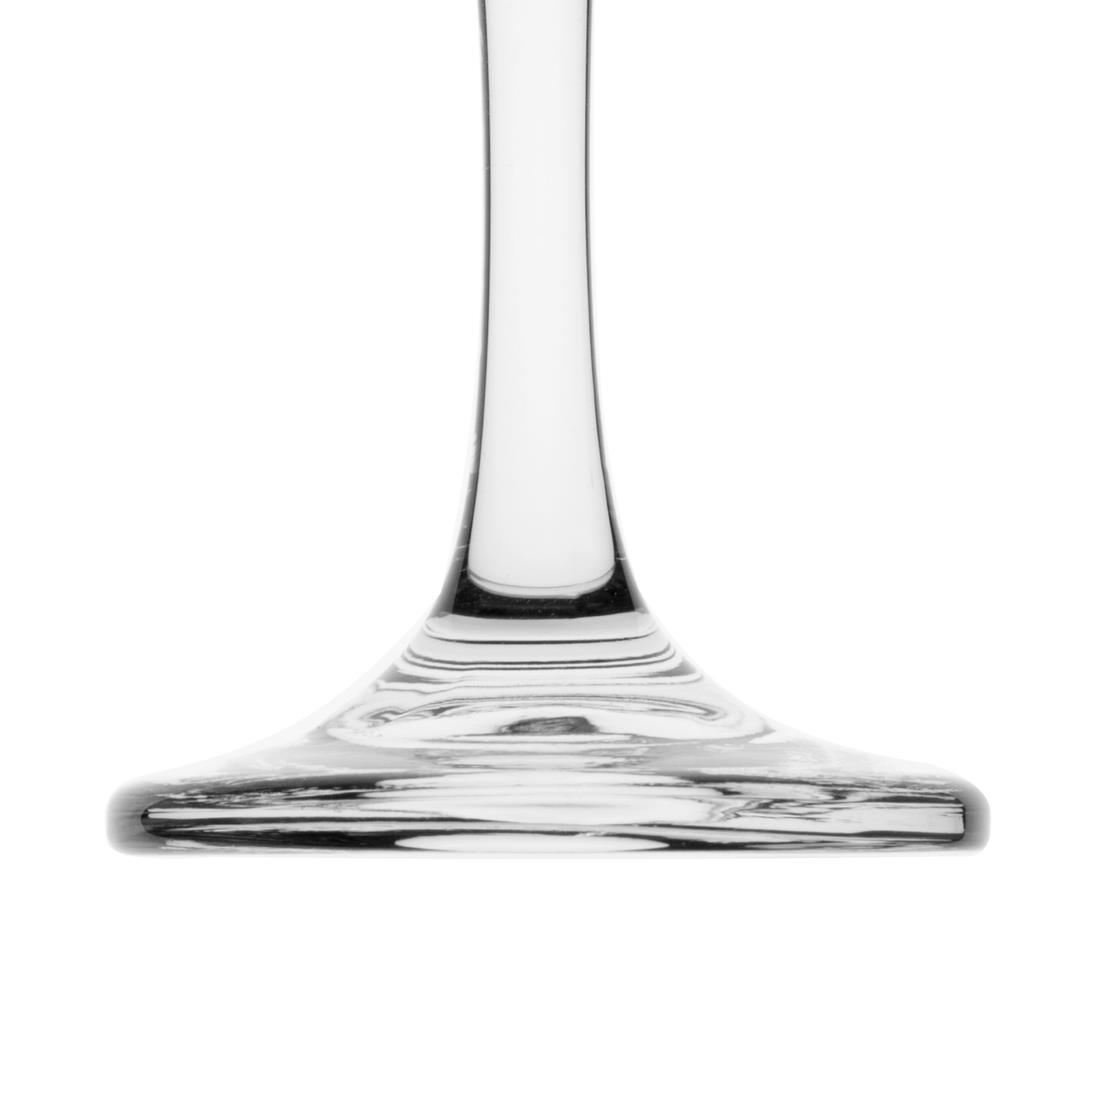 Olympia Solar Wine Glasses 245ml (Pack of 96) - GD324  - 3